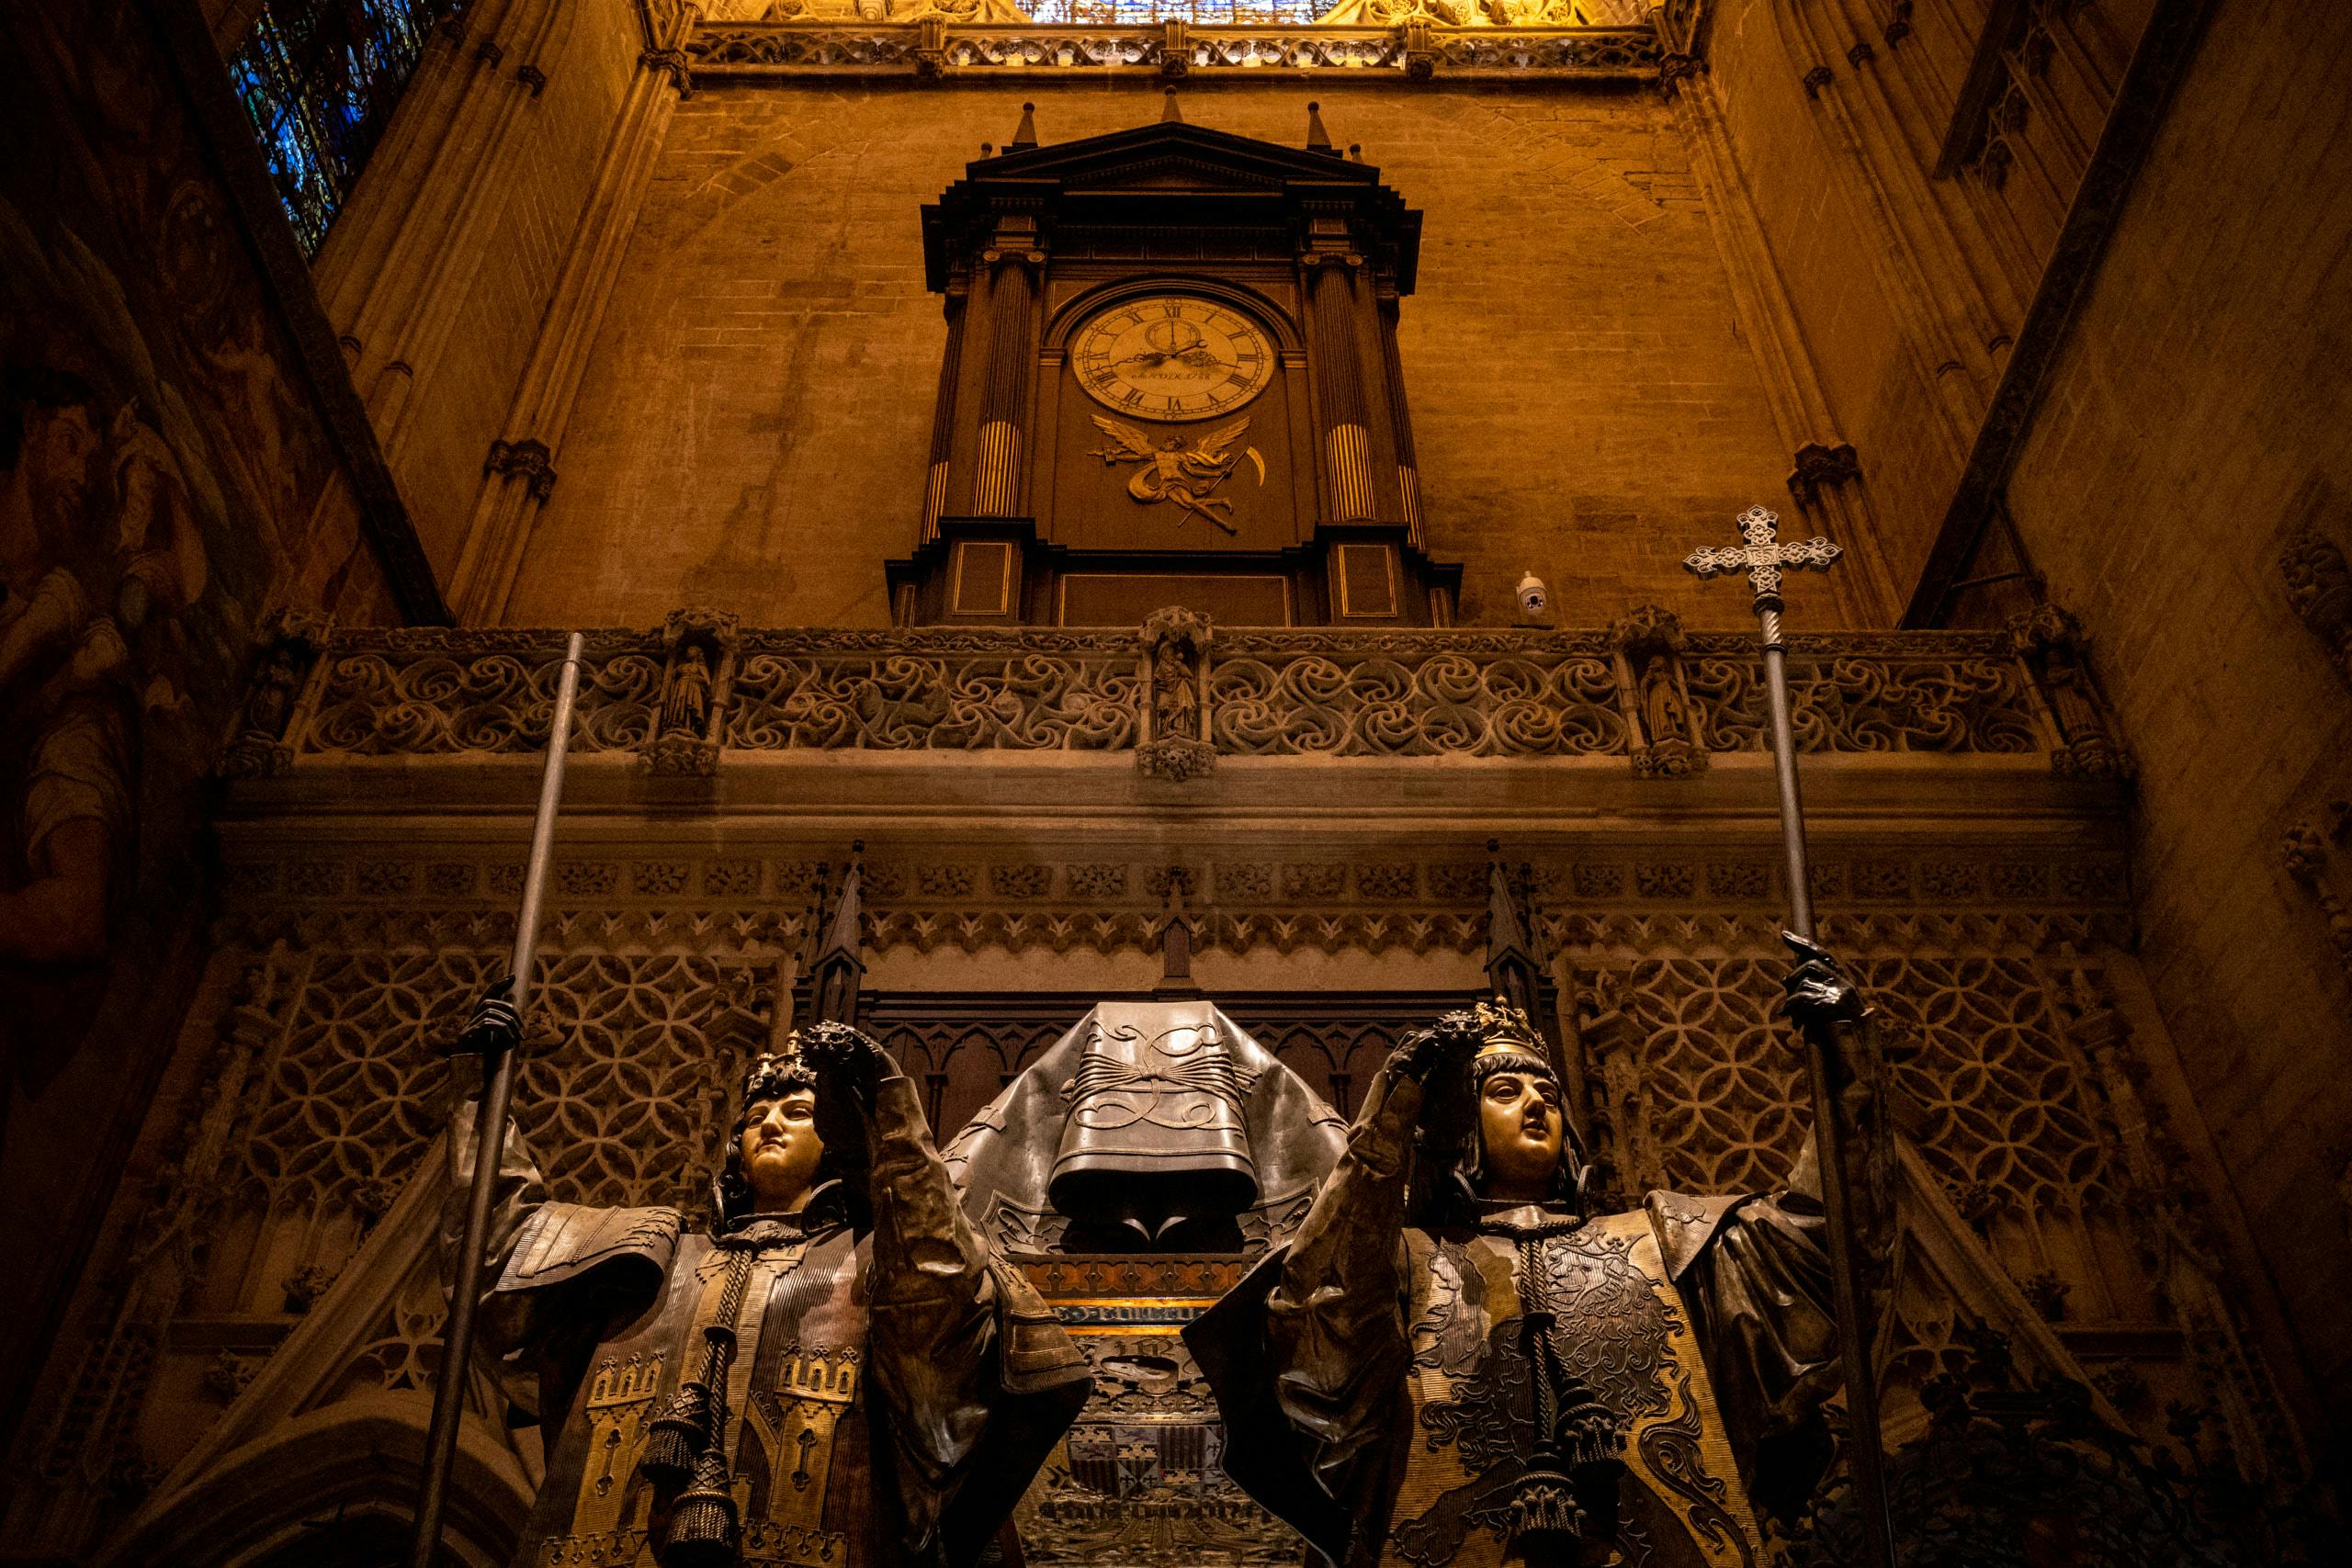 2 statues of priests in front of a holy artifact and a giant clock in the background inside a cathedral